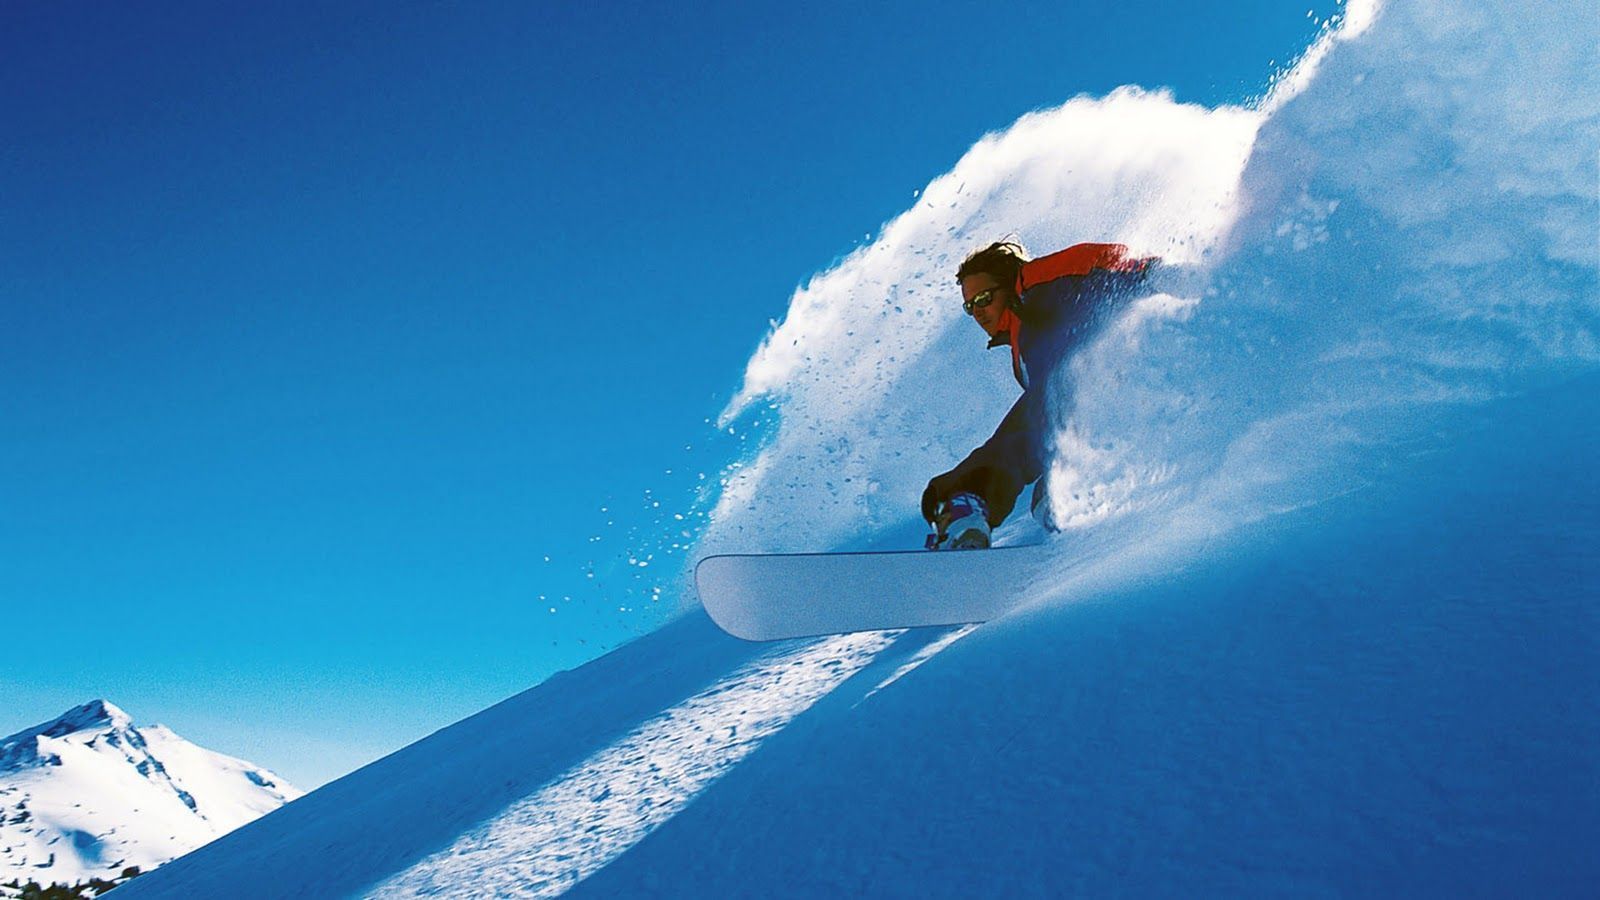 Top Hd Snowboarding Wallpapers And Images for Pinterest